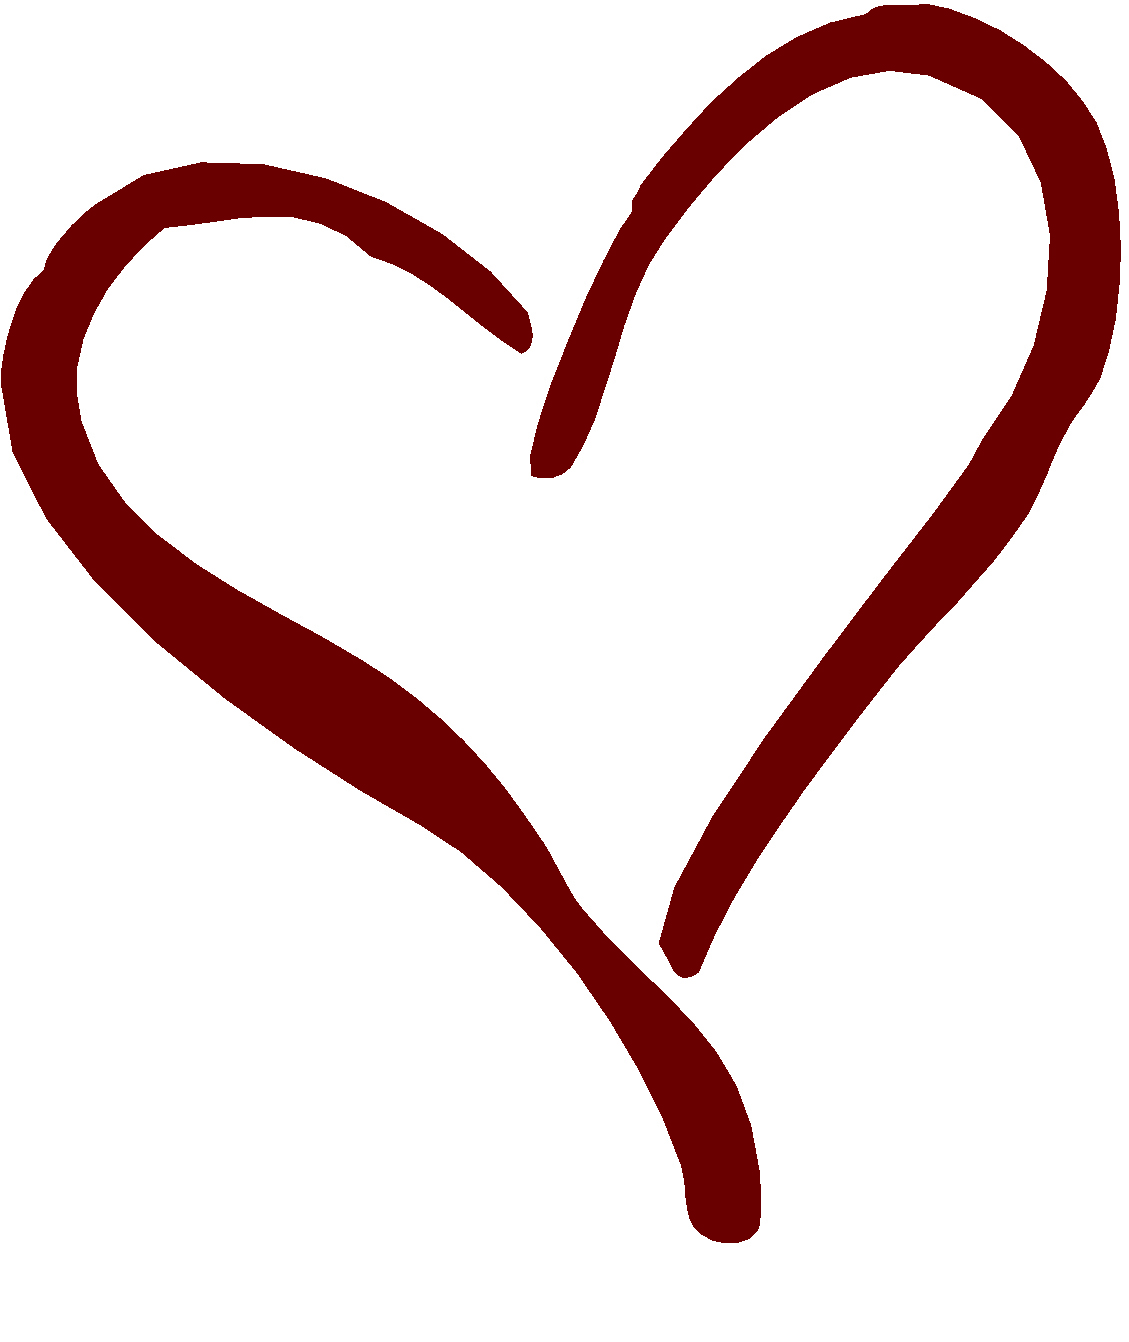 Outline Of A Heart Shape - ClipArt Best